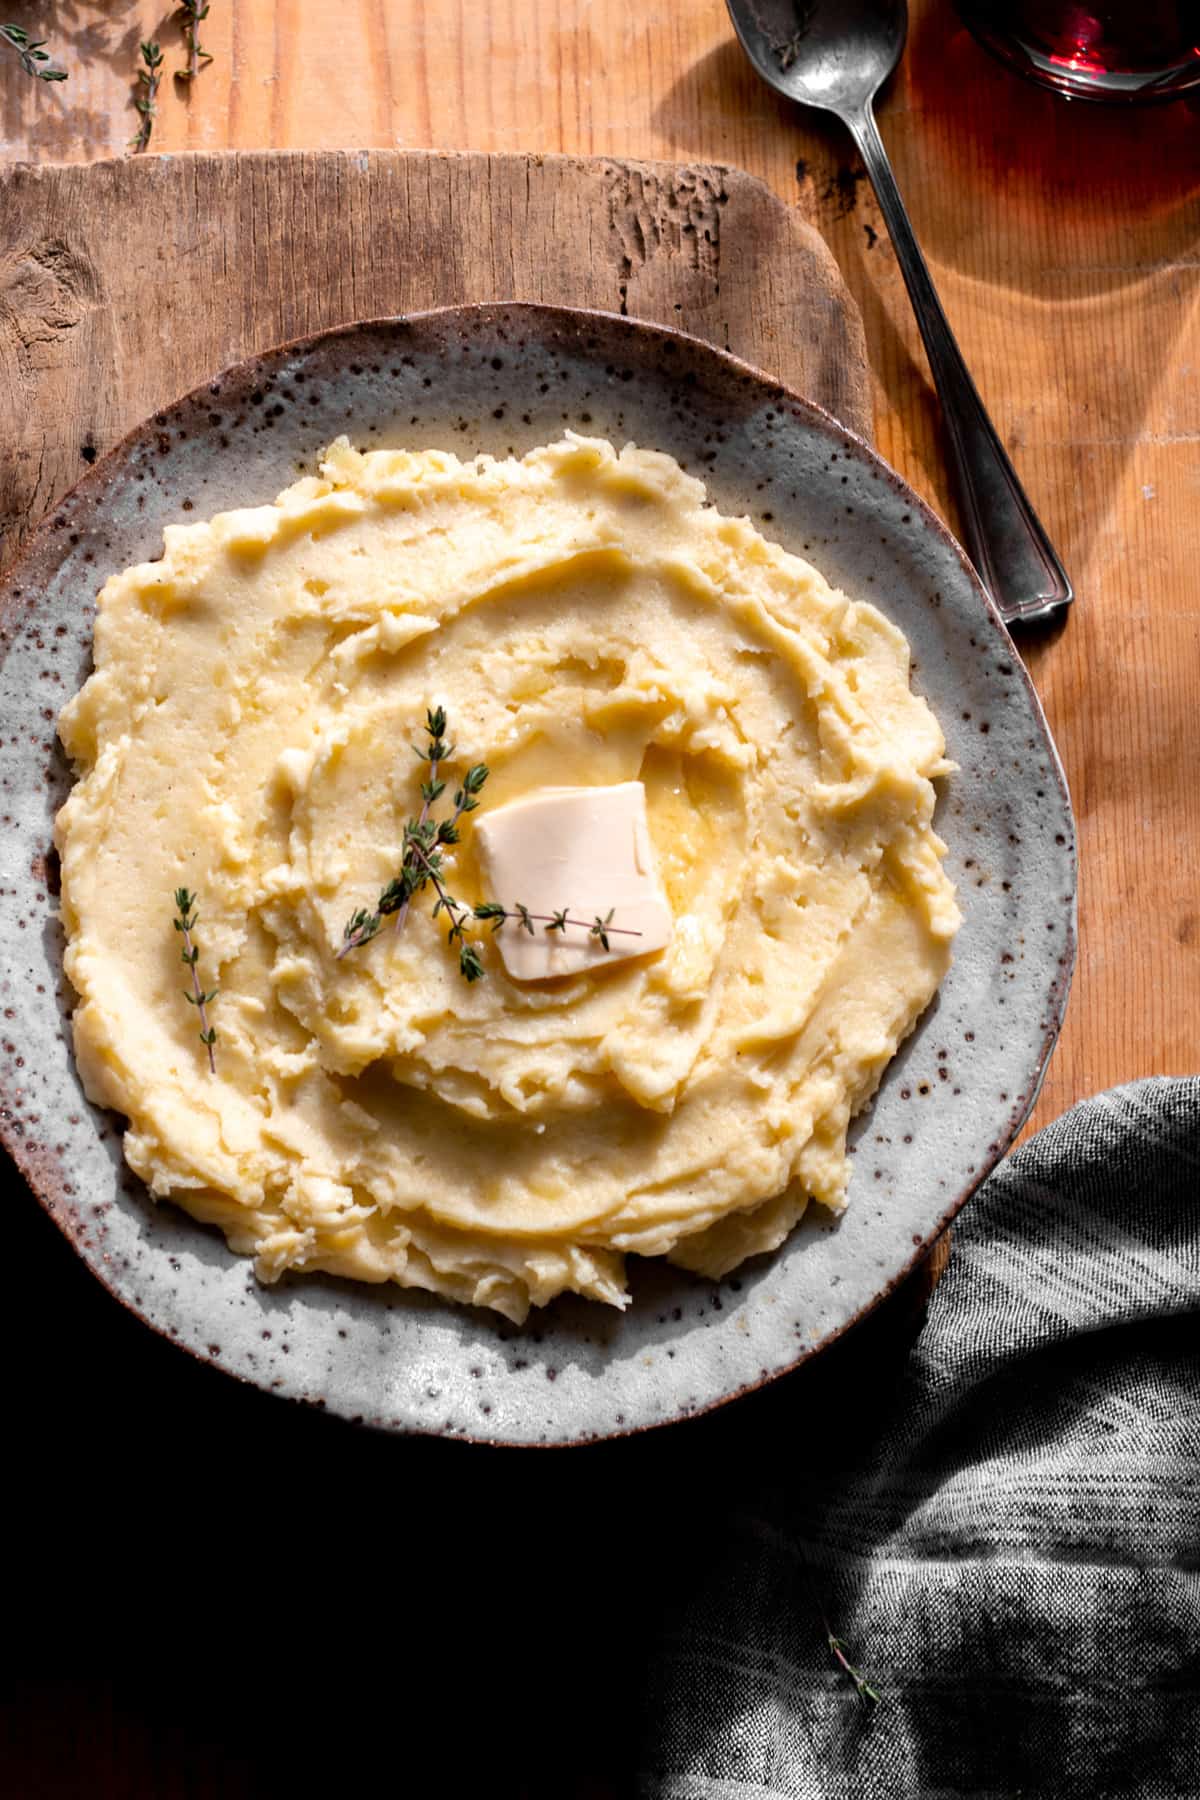 Mashed potatoes with pat of butter and fresh thyme styled in bowl.